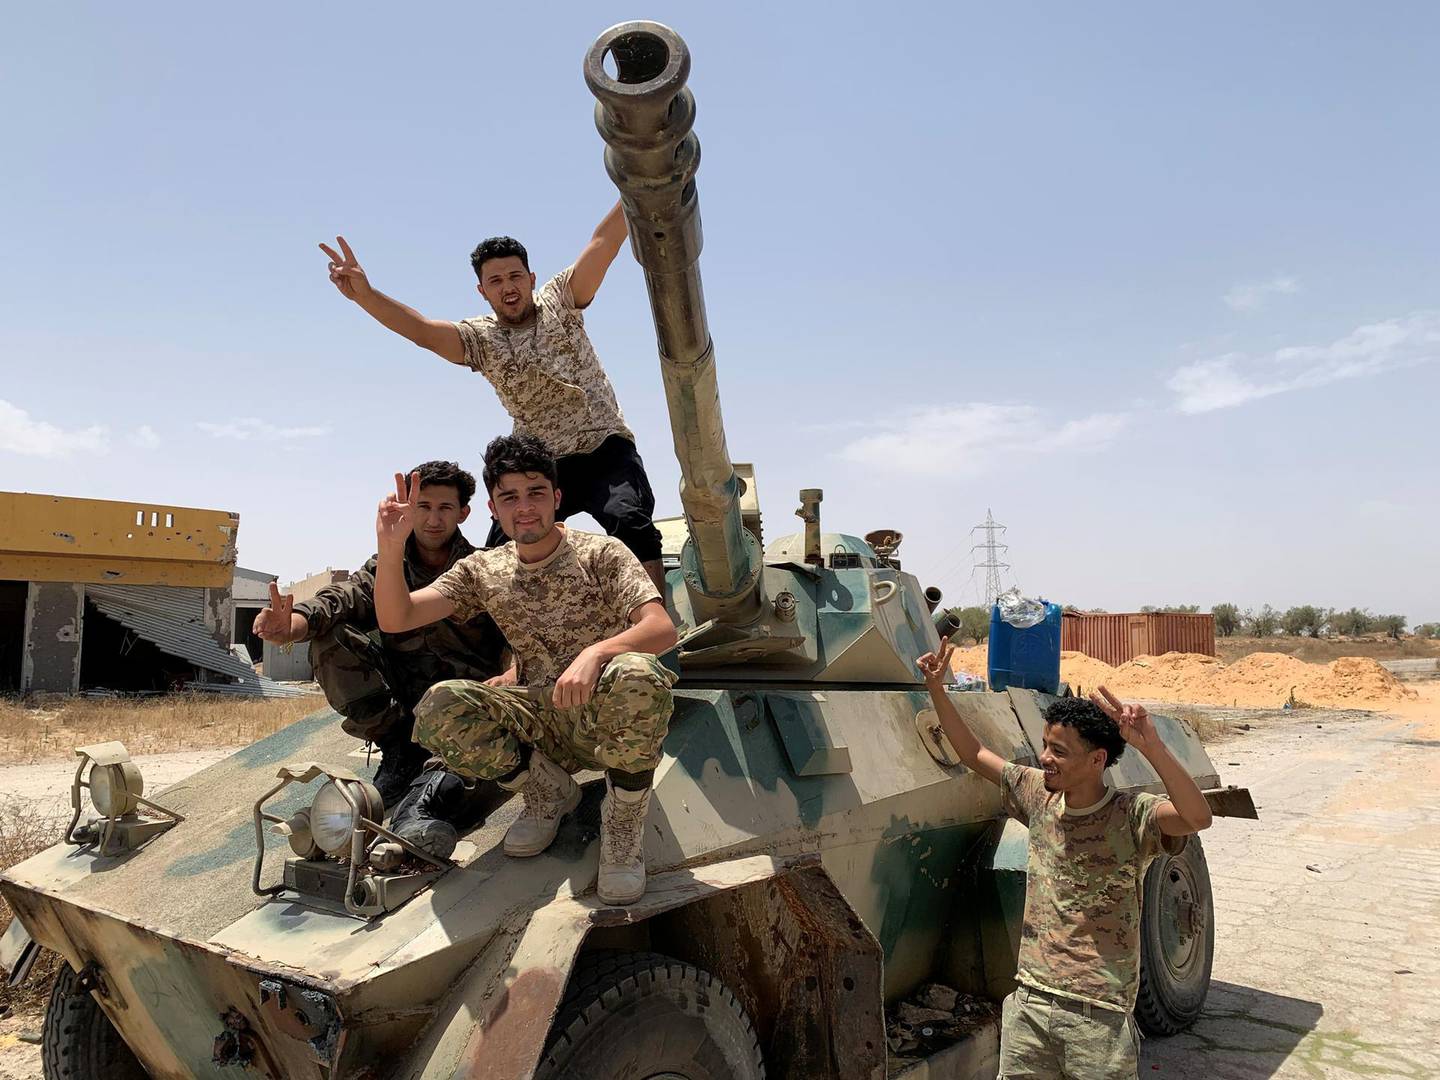 FILE PHOTO: Fighters loyal to Libya's internationally recognised government celebrate after regaining control over the city, in Tripoli, Libya, June 4, 2020. REUTERS/STAFF/File Photo